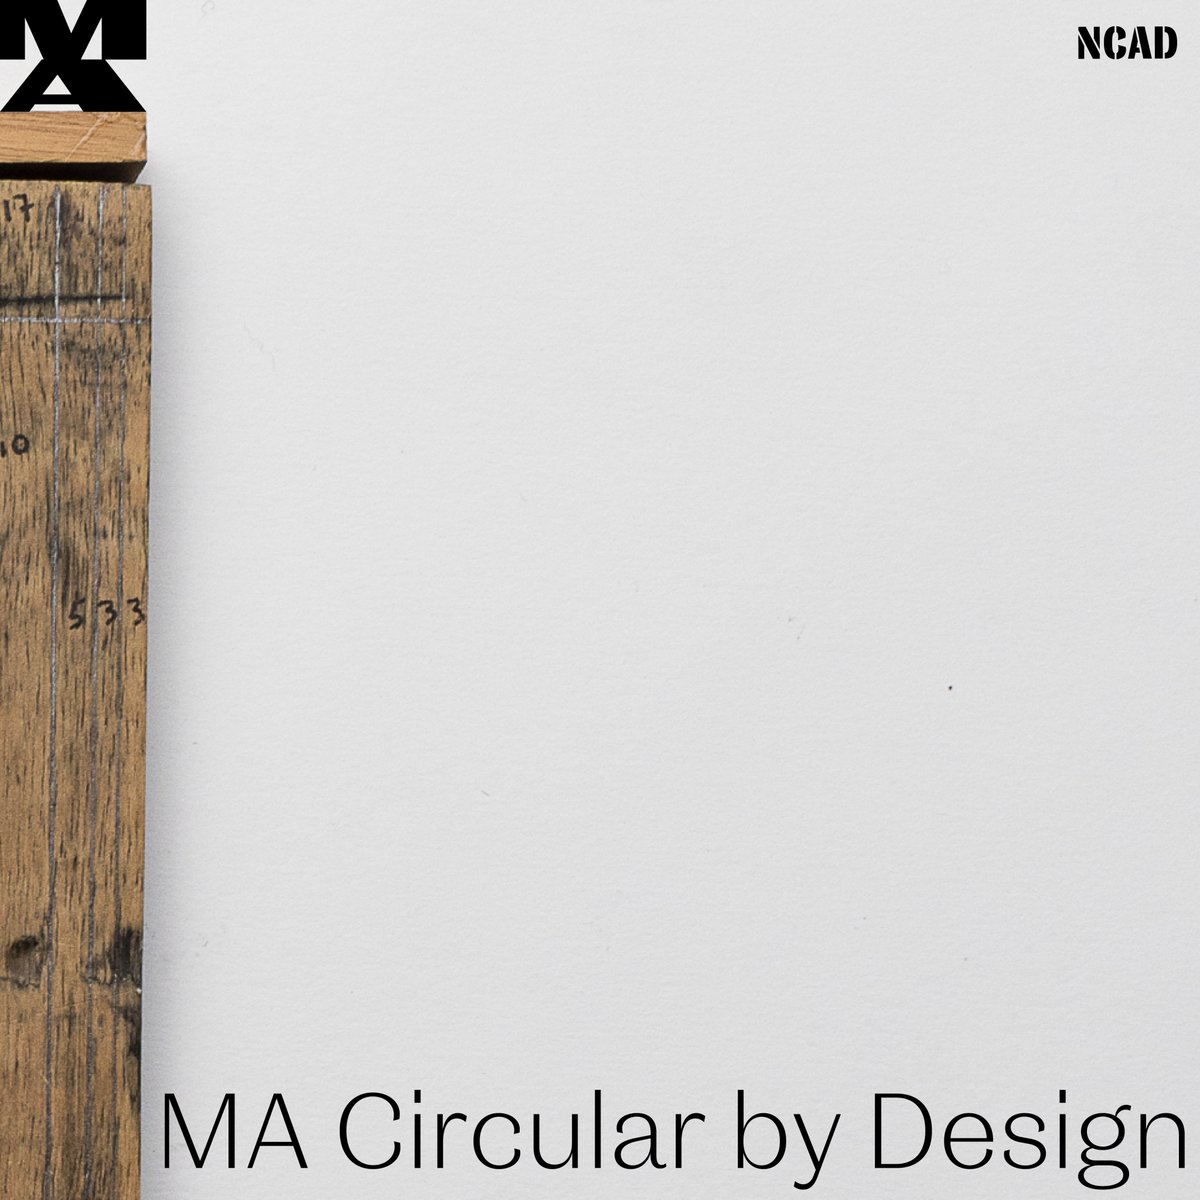 Working in the fashion and textiles sector? Boost your career with our MA in Circular by Design. Find full details at the link in our bio today.